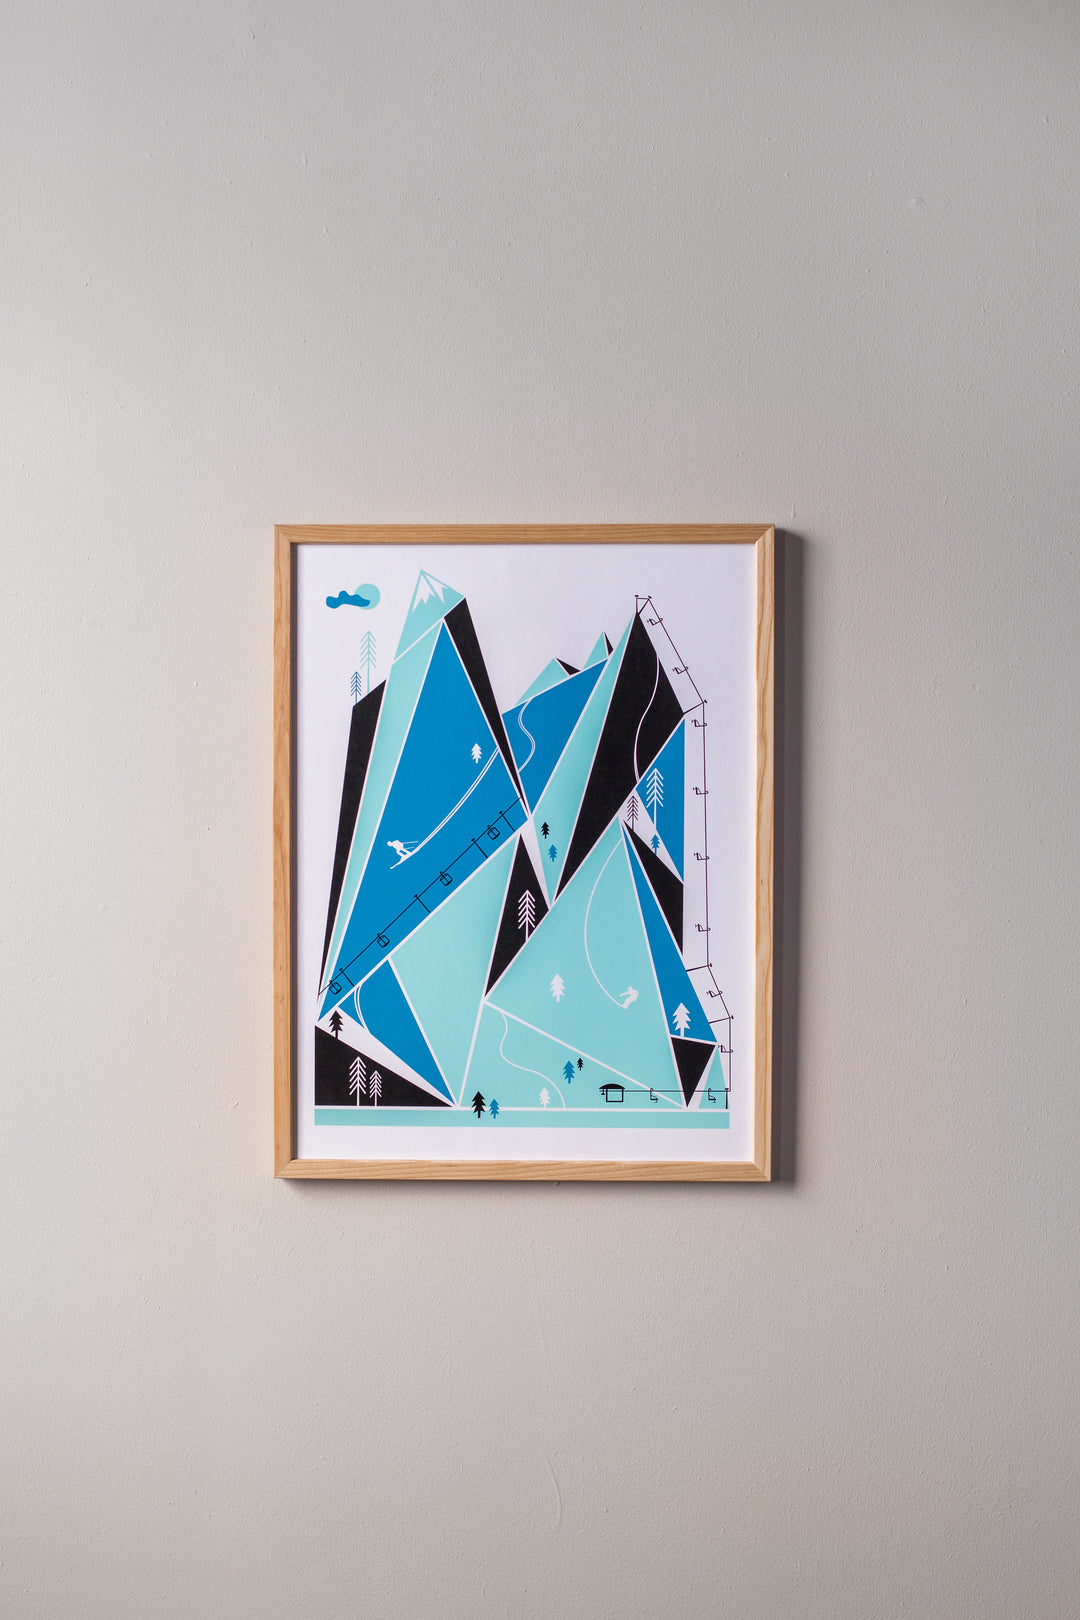 Ski Resort Print by Brainstorm - Get outside and go skiing! Winter Vibes! 